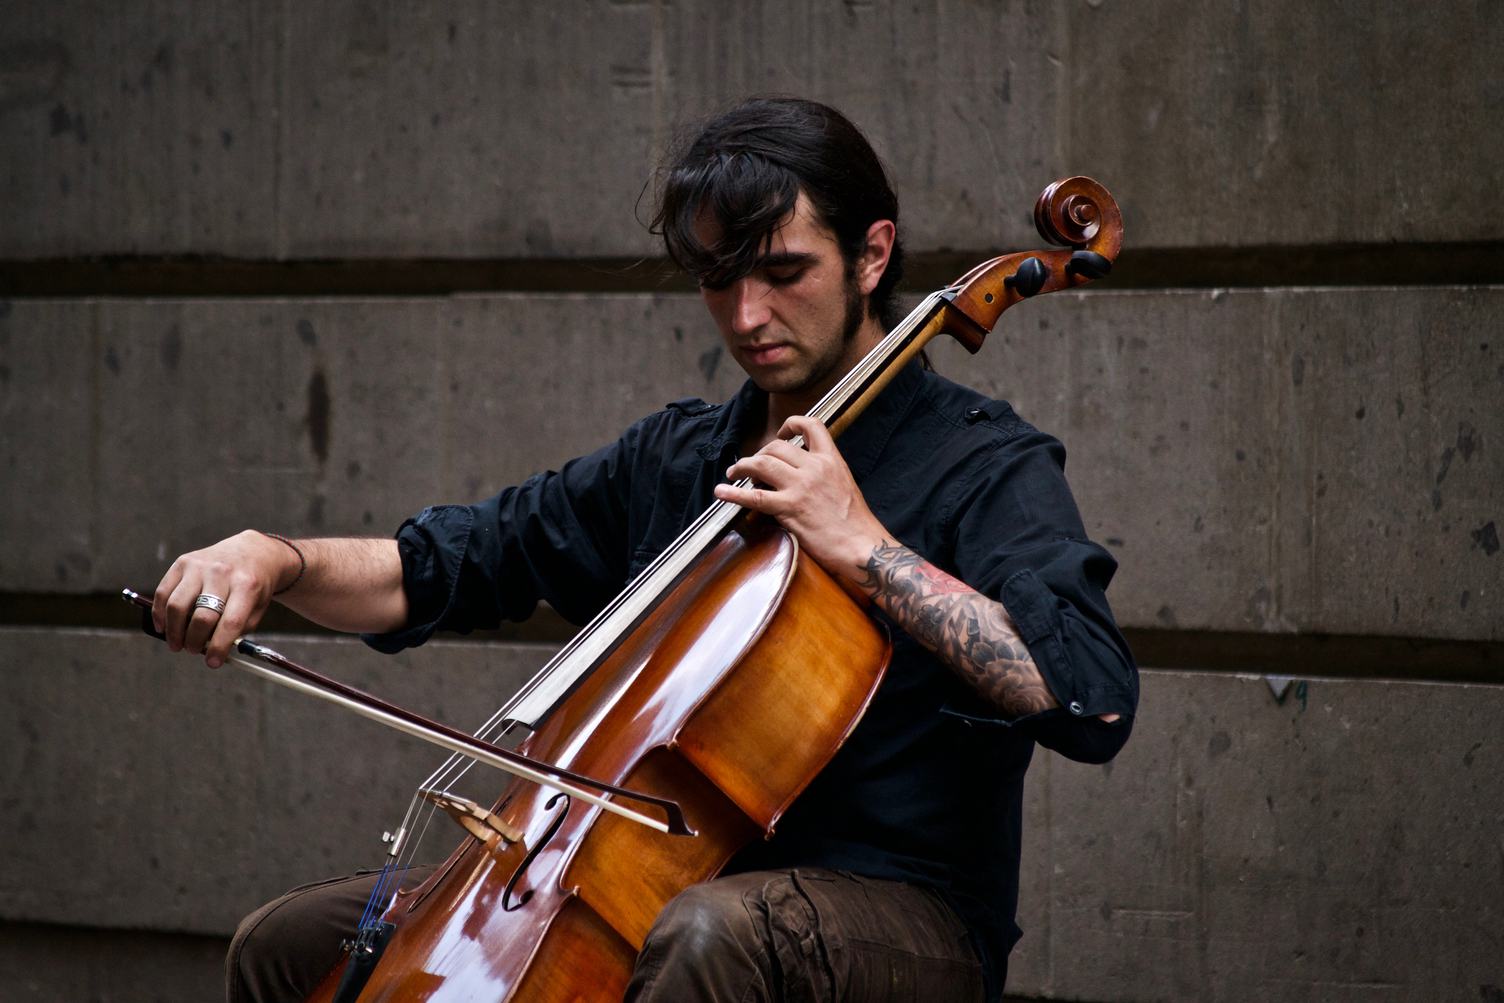 Man with Tattoo Playing Cello Outdoors